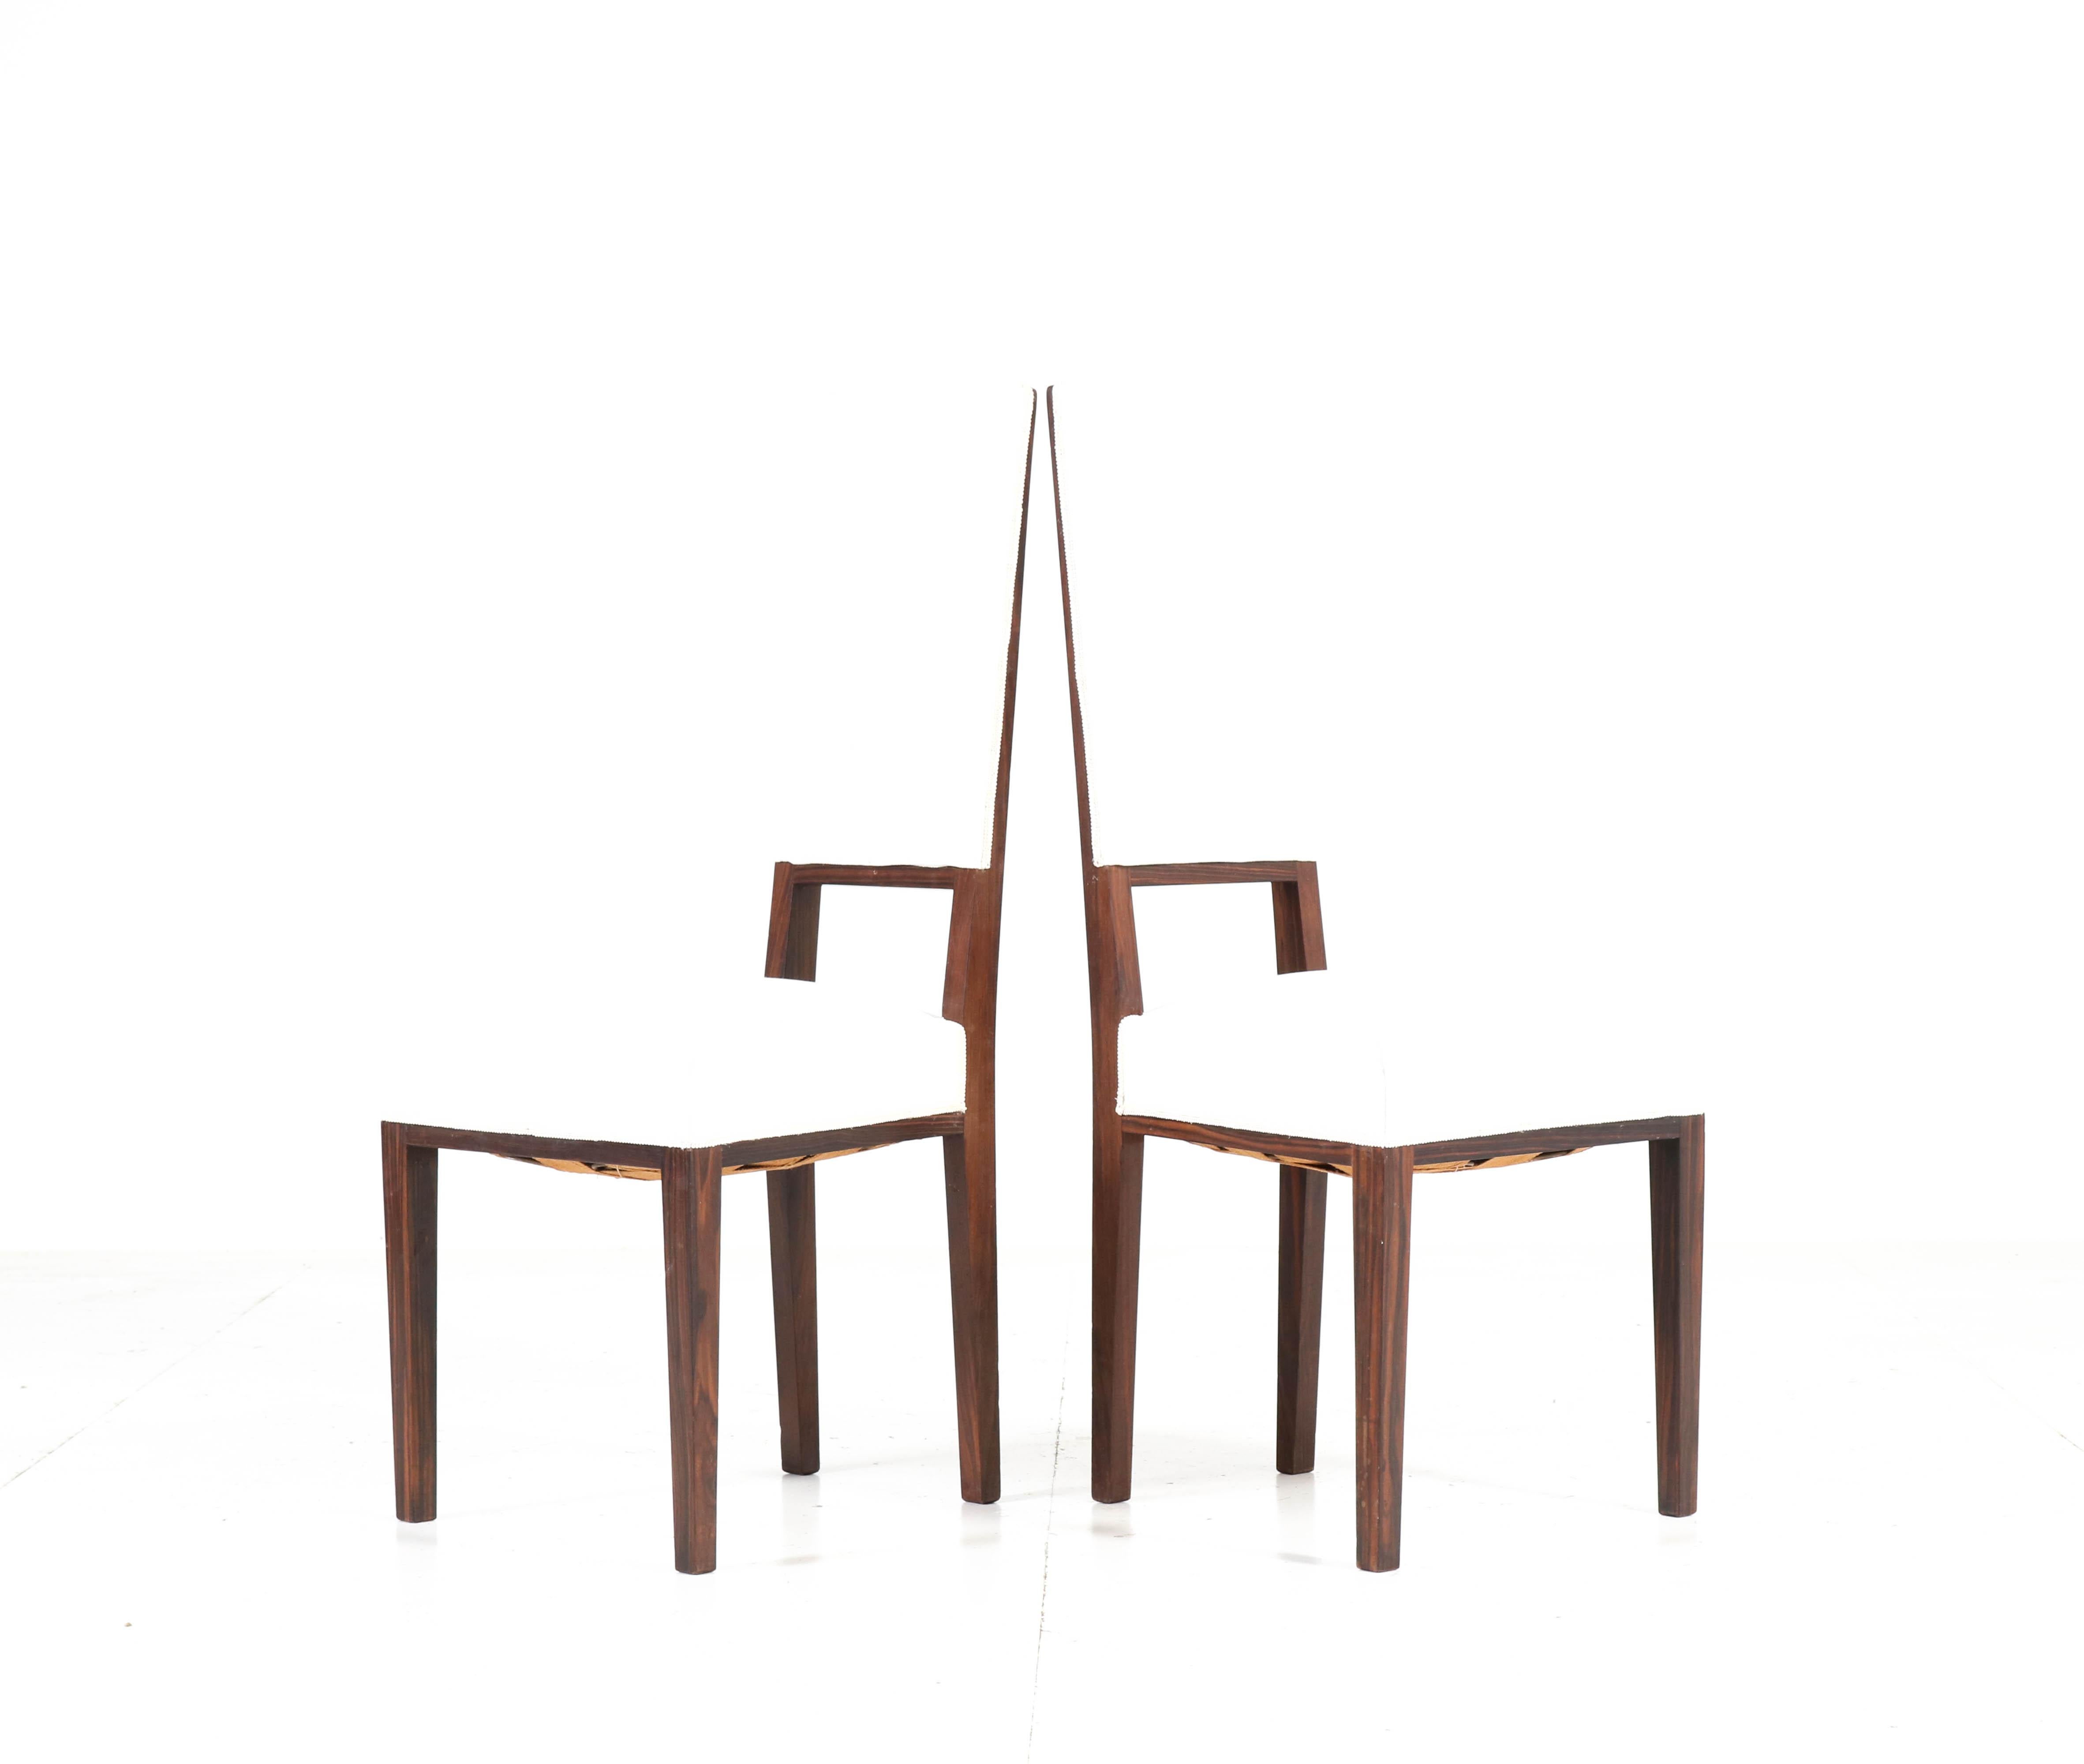 Dutch Eight Ebony Macassar Art Deco Dining Room Chairs by 't Woonhuys Amsterdam, 1920s